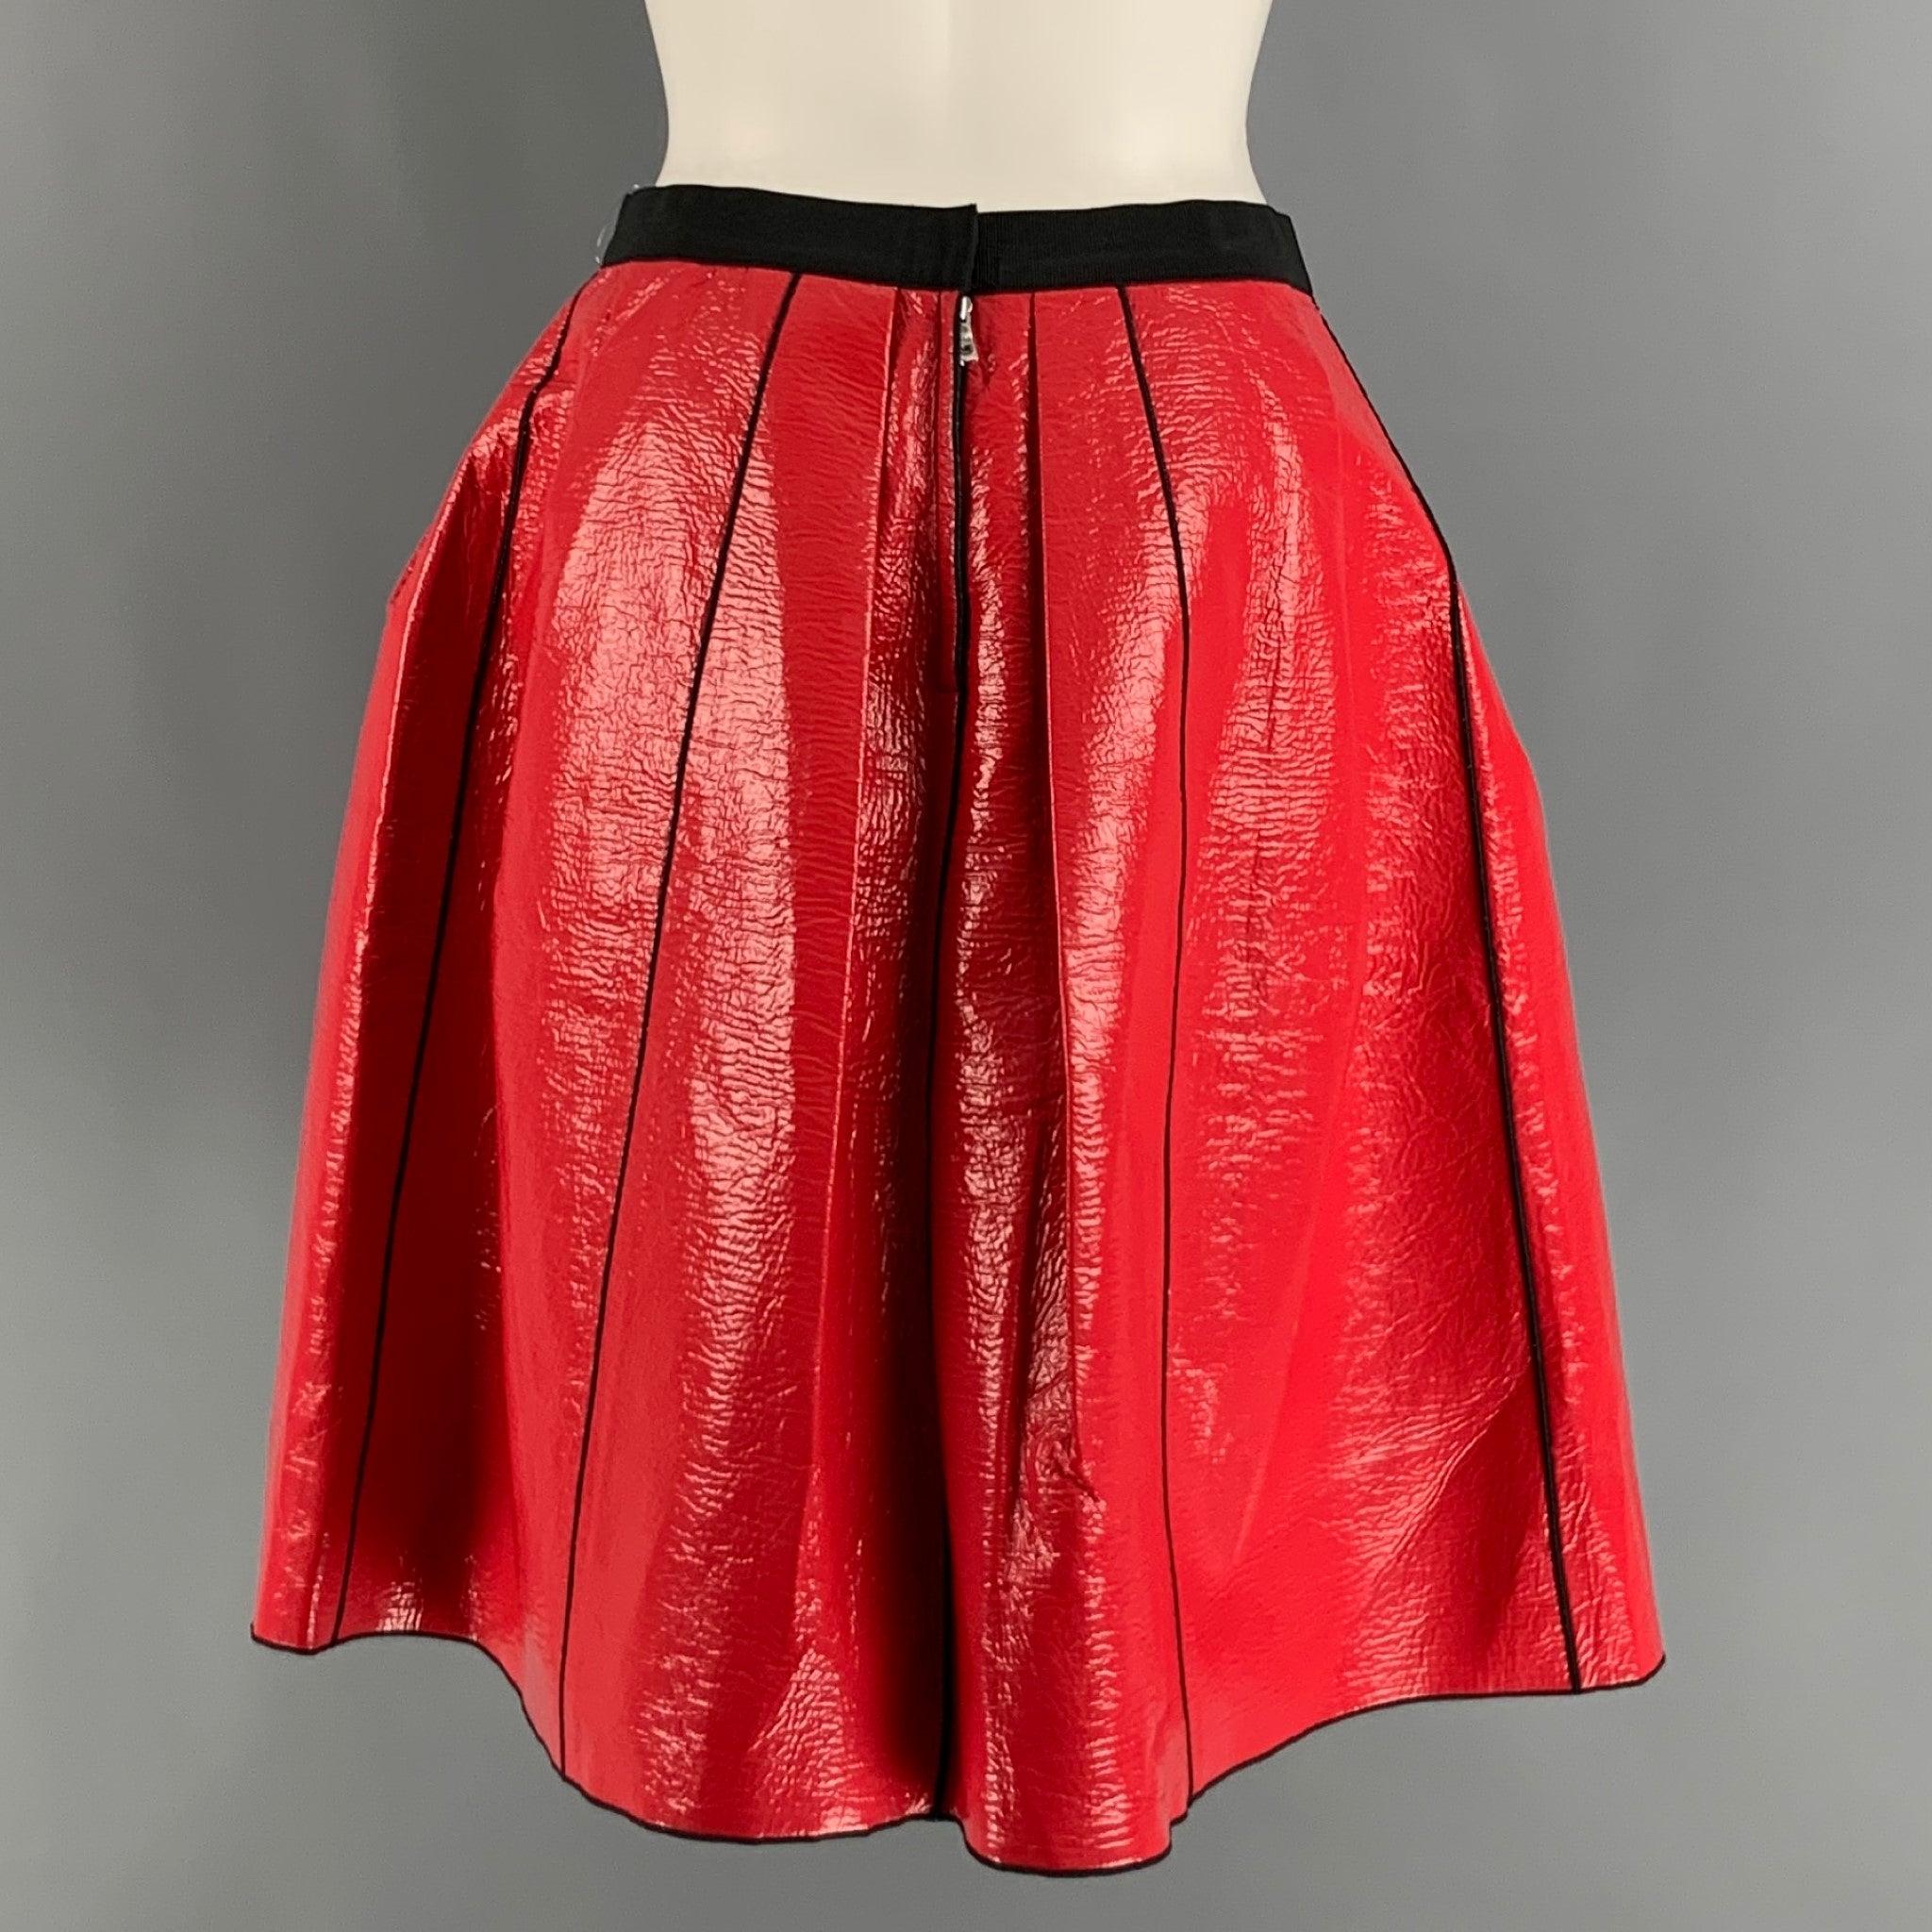 MARC JACOBS Size 2 Red Black Coated Cotton Solid A-Line Skirt In Excellent Condition For Sale In San Francisco, CA